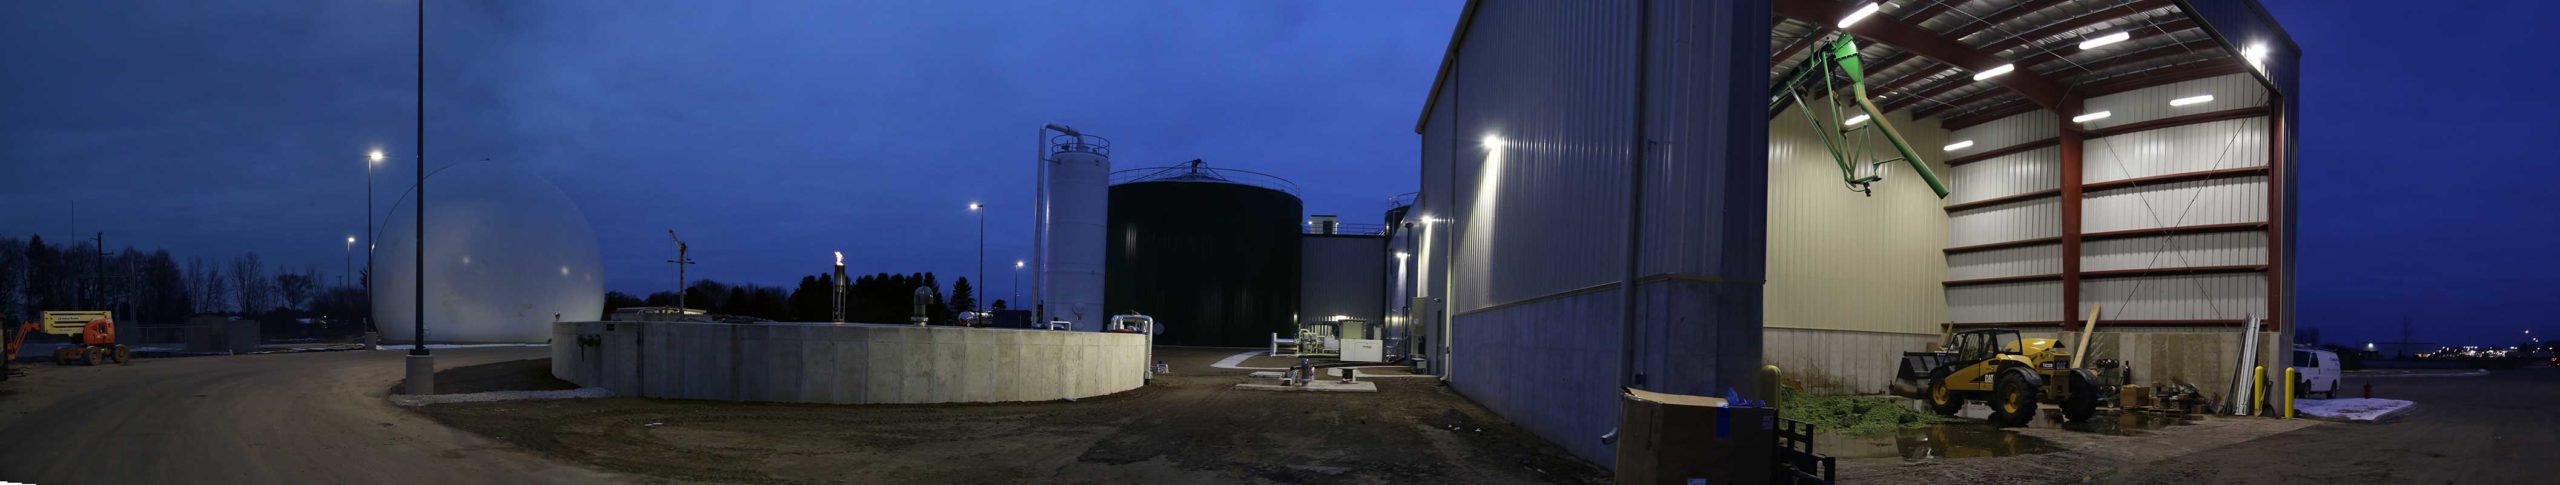 Fremont digester turning food scraps into electricity, fertilizer and compost